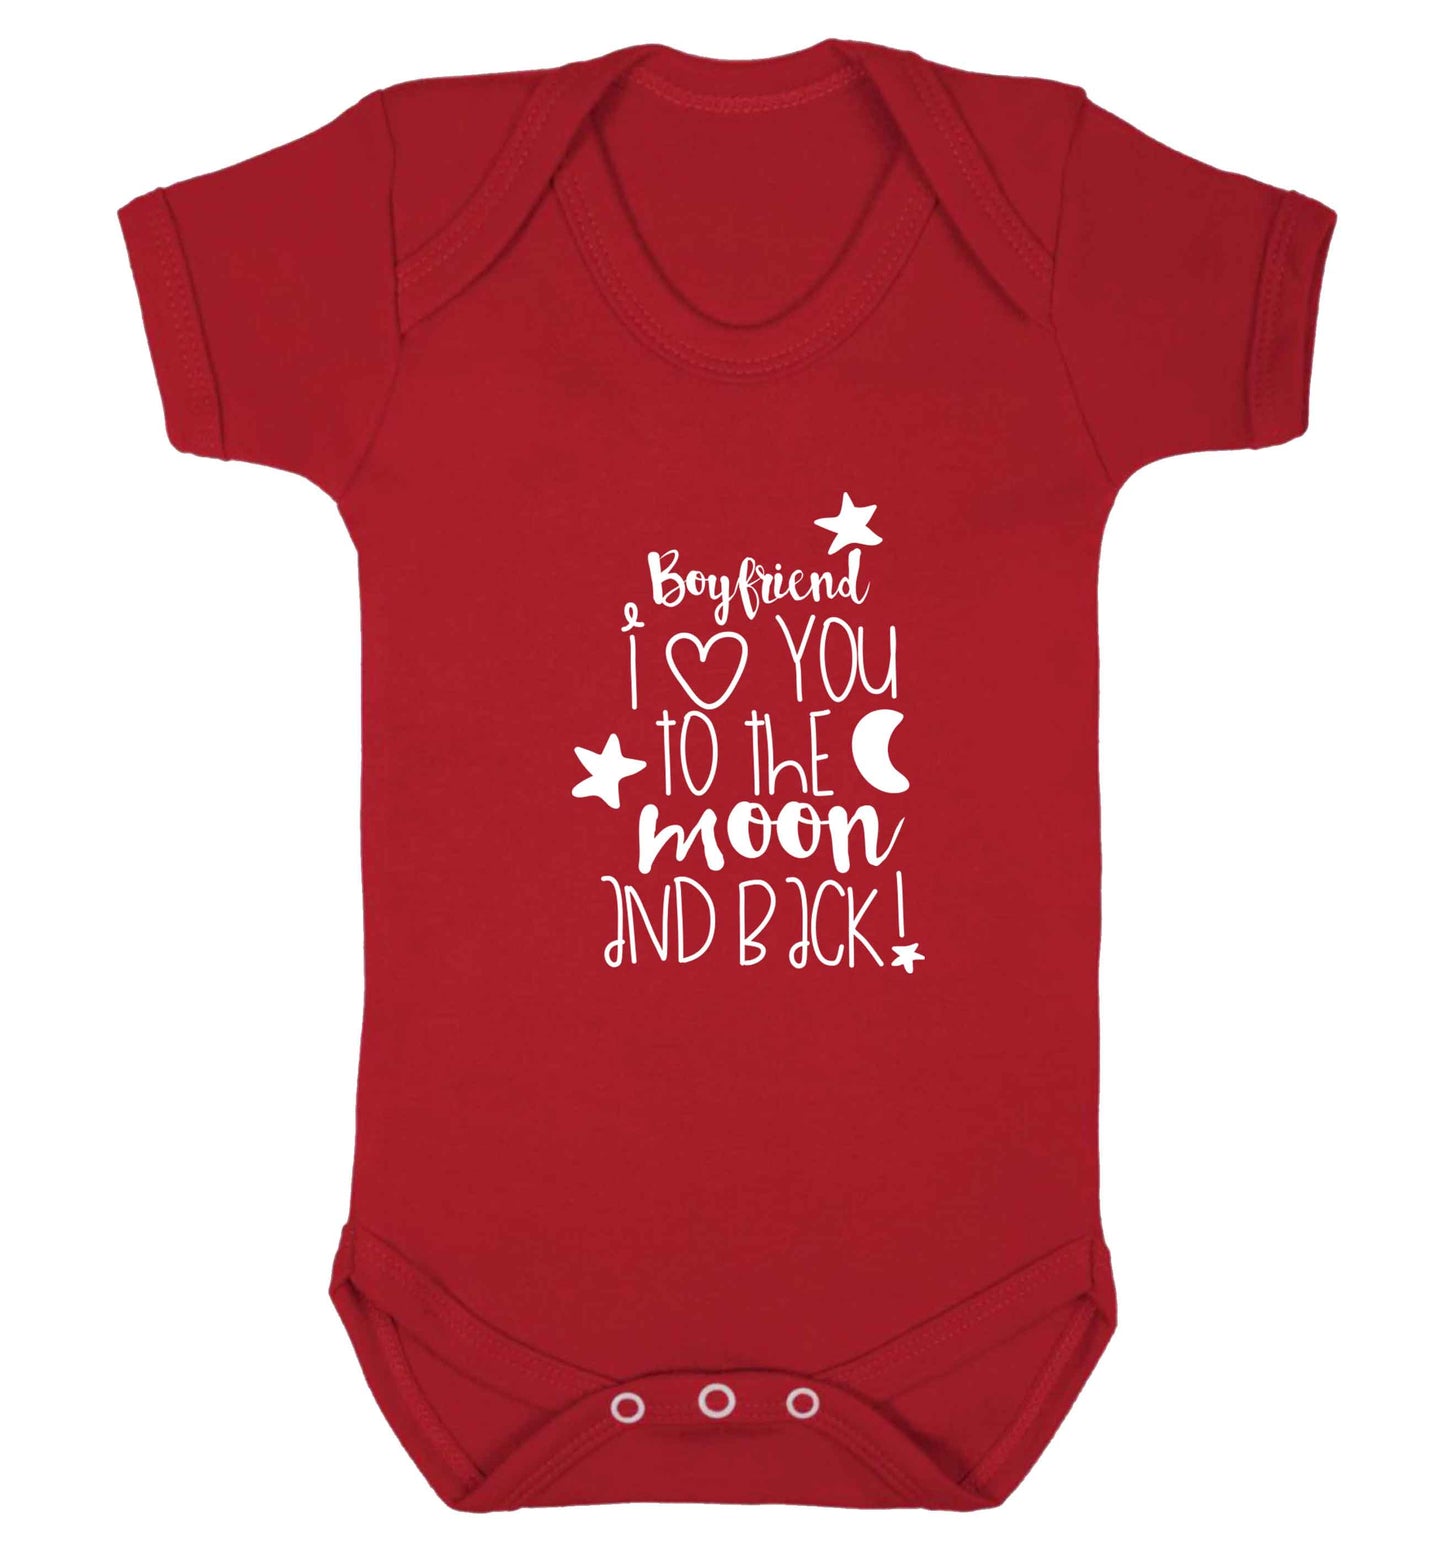 Boyfriend I love you to the moon and back baby vest red 18-24 months